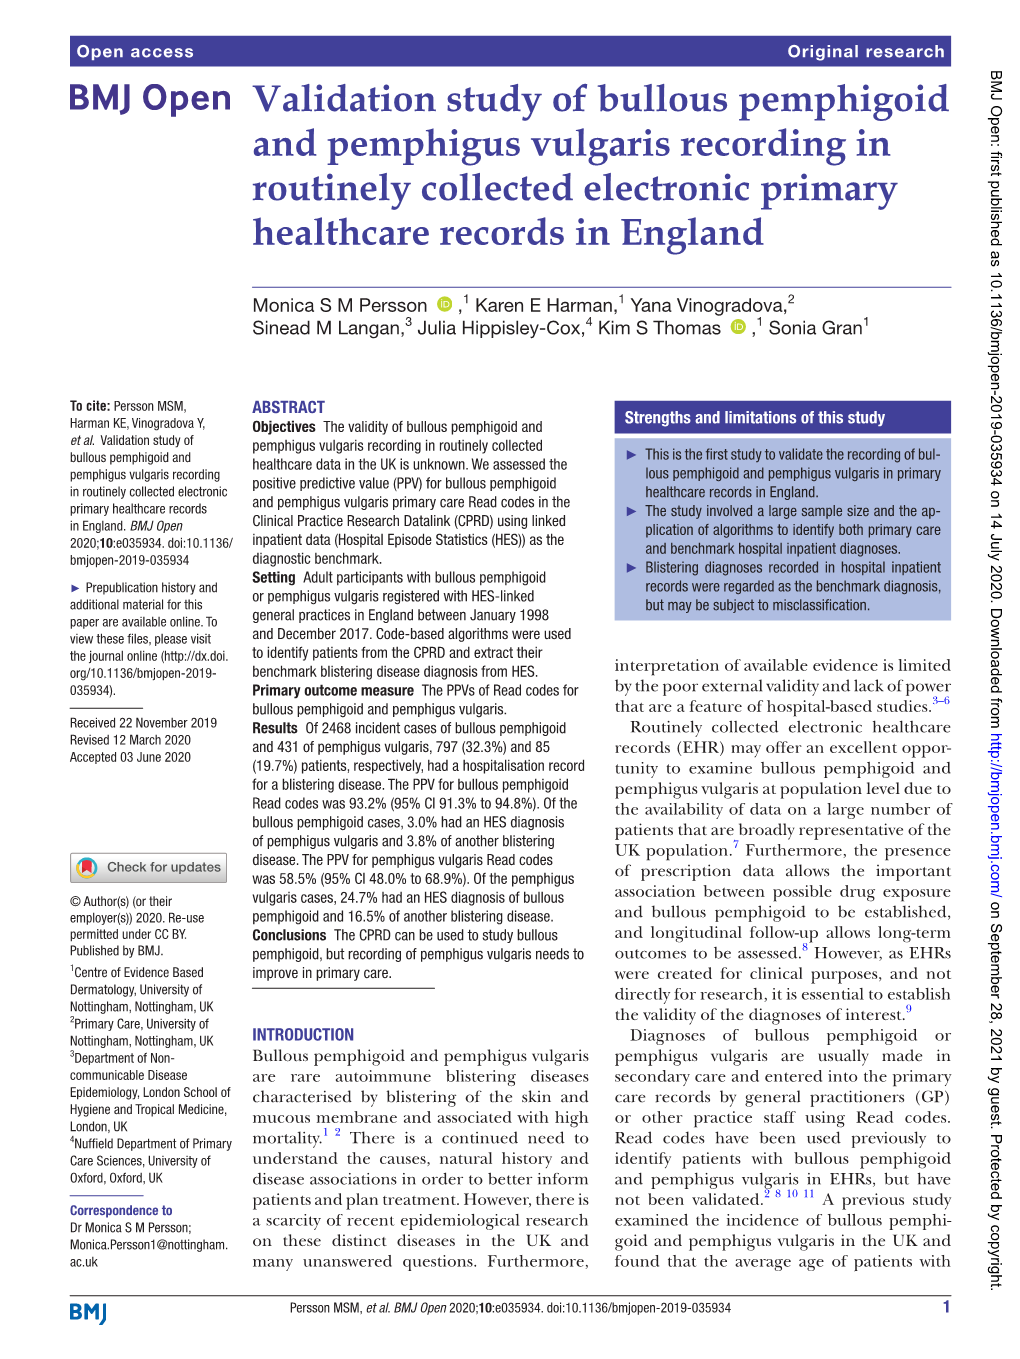 Validation Study of Bullous Pemphigoid and Pemphigus Vulgaris Recording in Routinely Collected Electronic Primary Healthcare Records in England